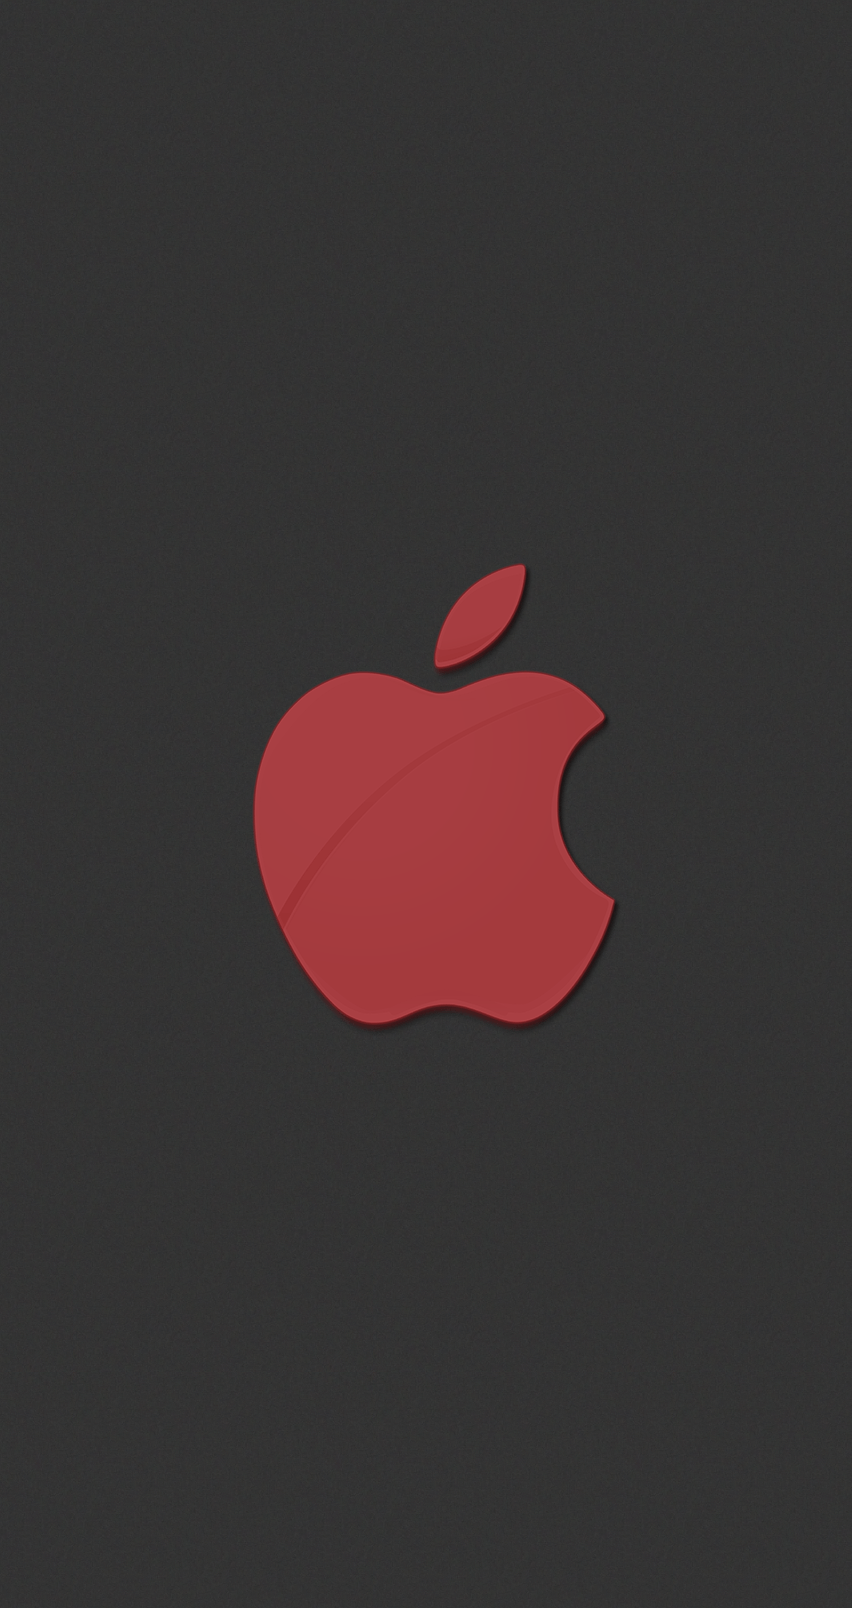 Cool and Awesome iPhone 6 Wallpaper in HD Quality